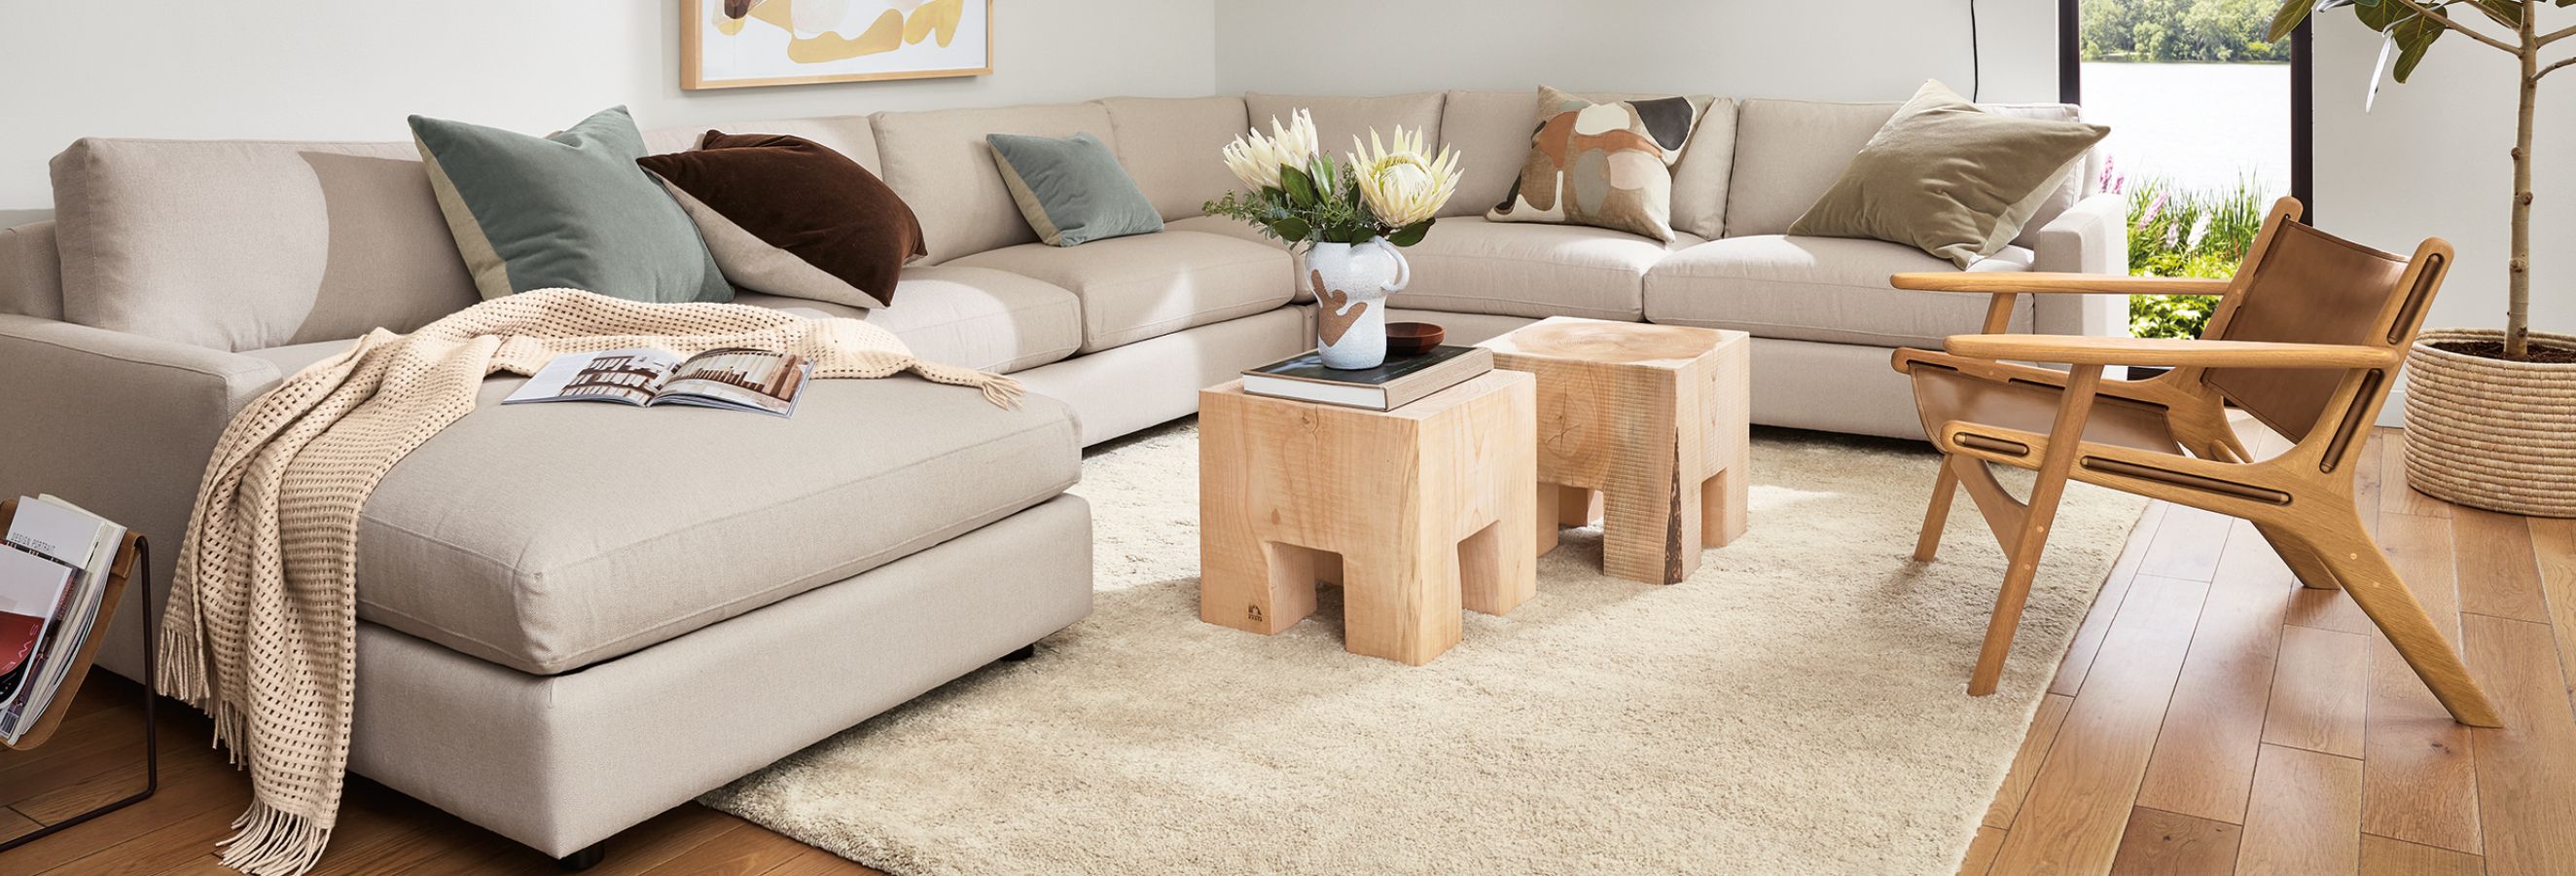 Affordable Classic Living Room Sets - Rooms To Go Furniture